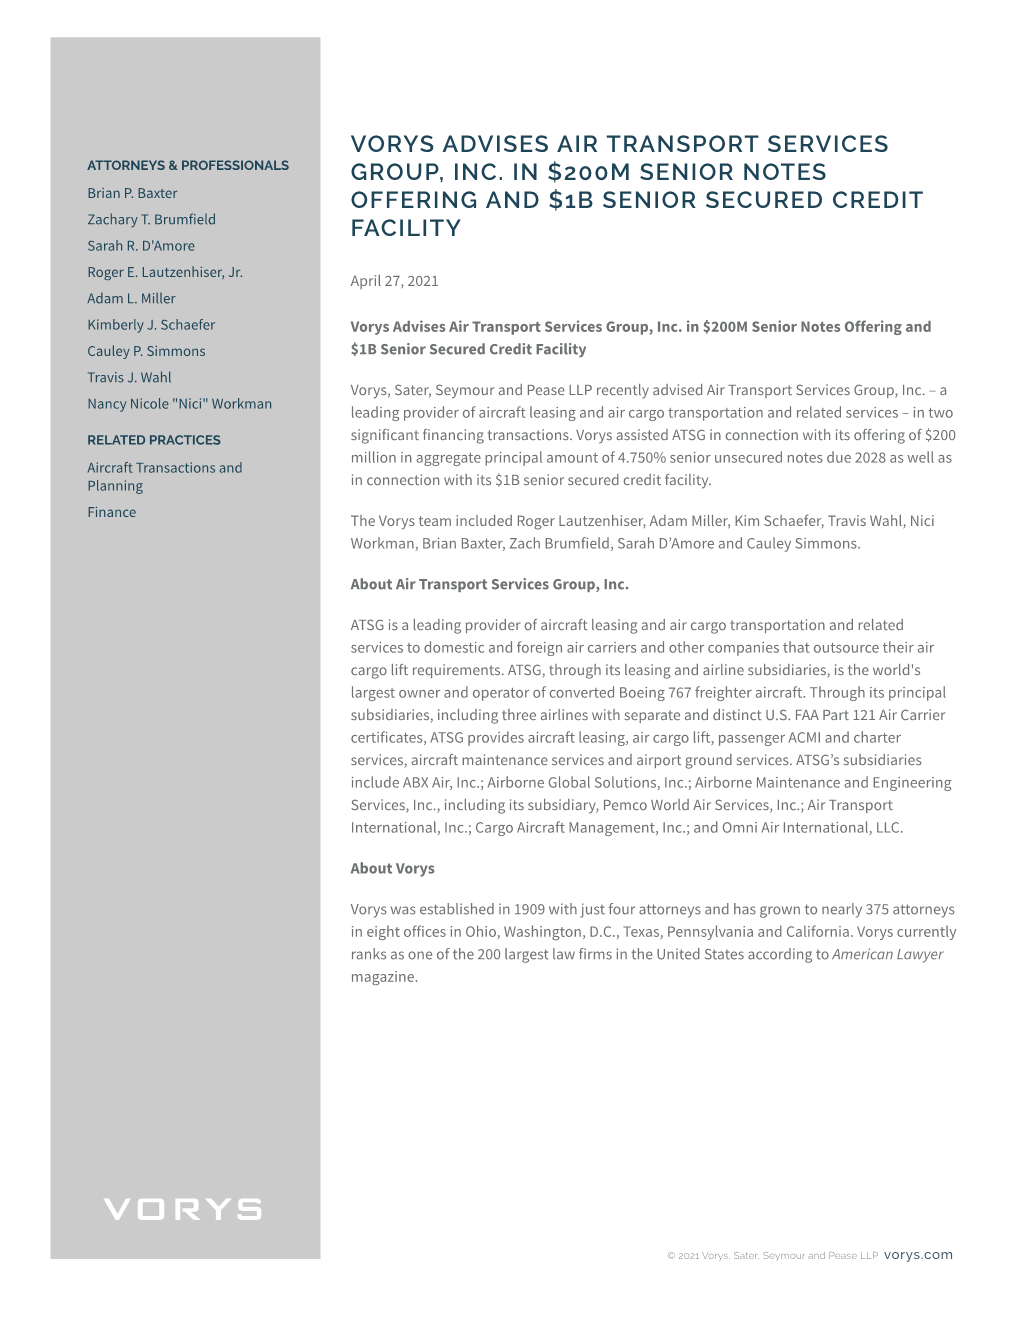 Vorys Advises Air Transport Services Group, Inc. in $200M Senior Notes Offering and Cauley P